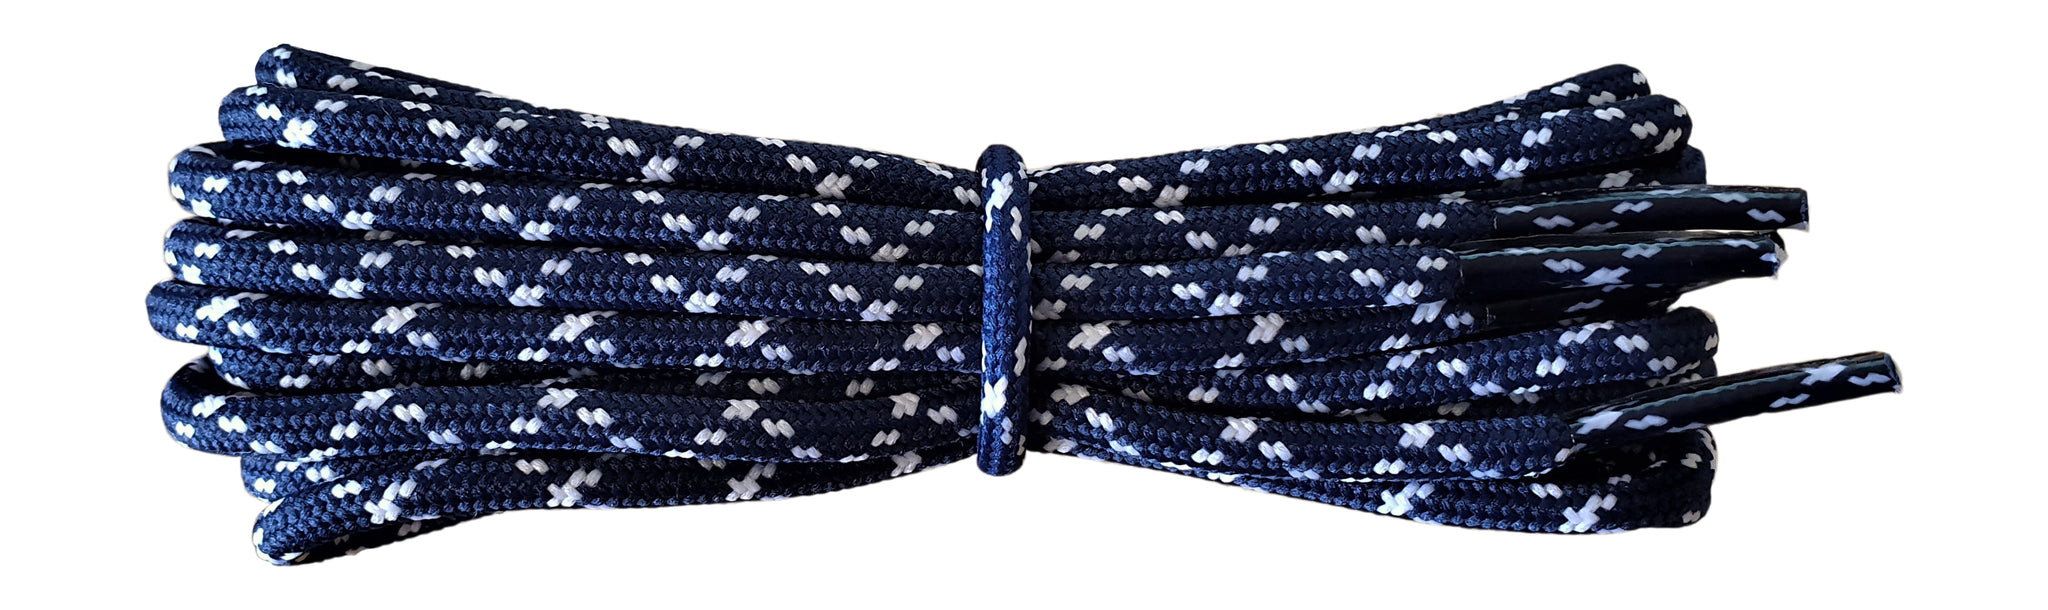 Strong round Shoelaces Navy with White flecks for walking shoes or trainers. - fabmania shoe laces